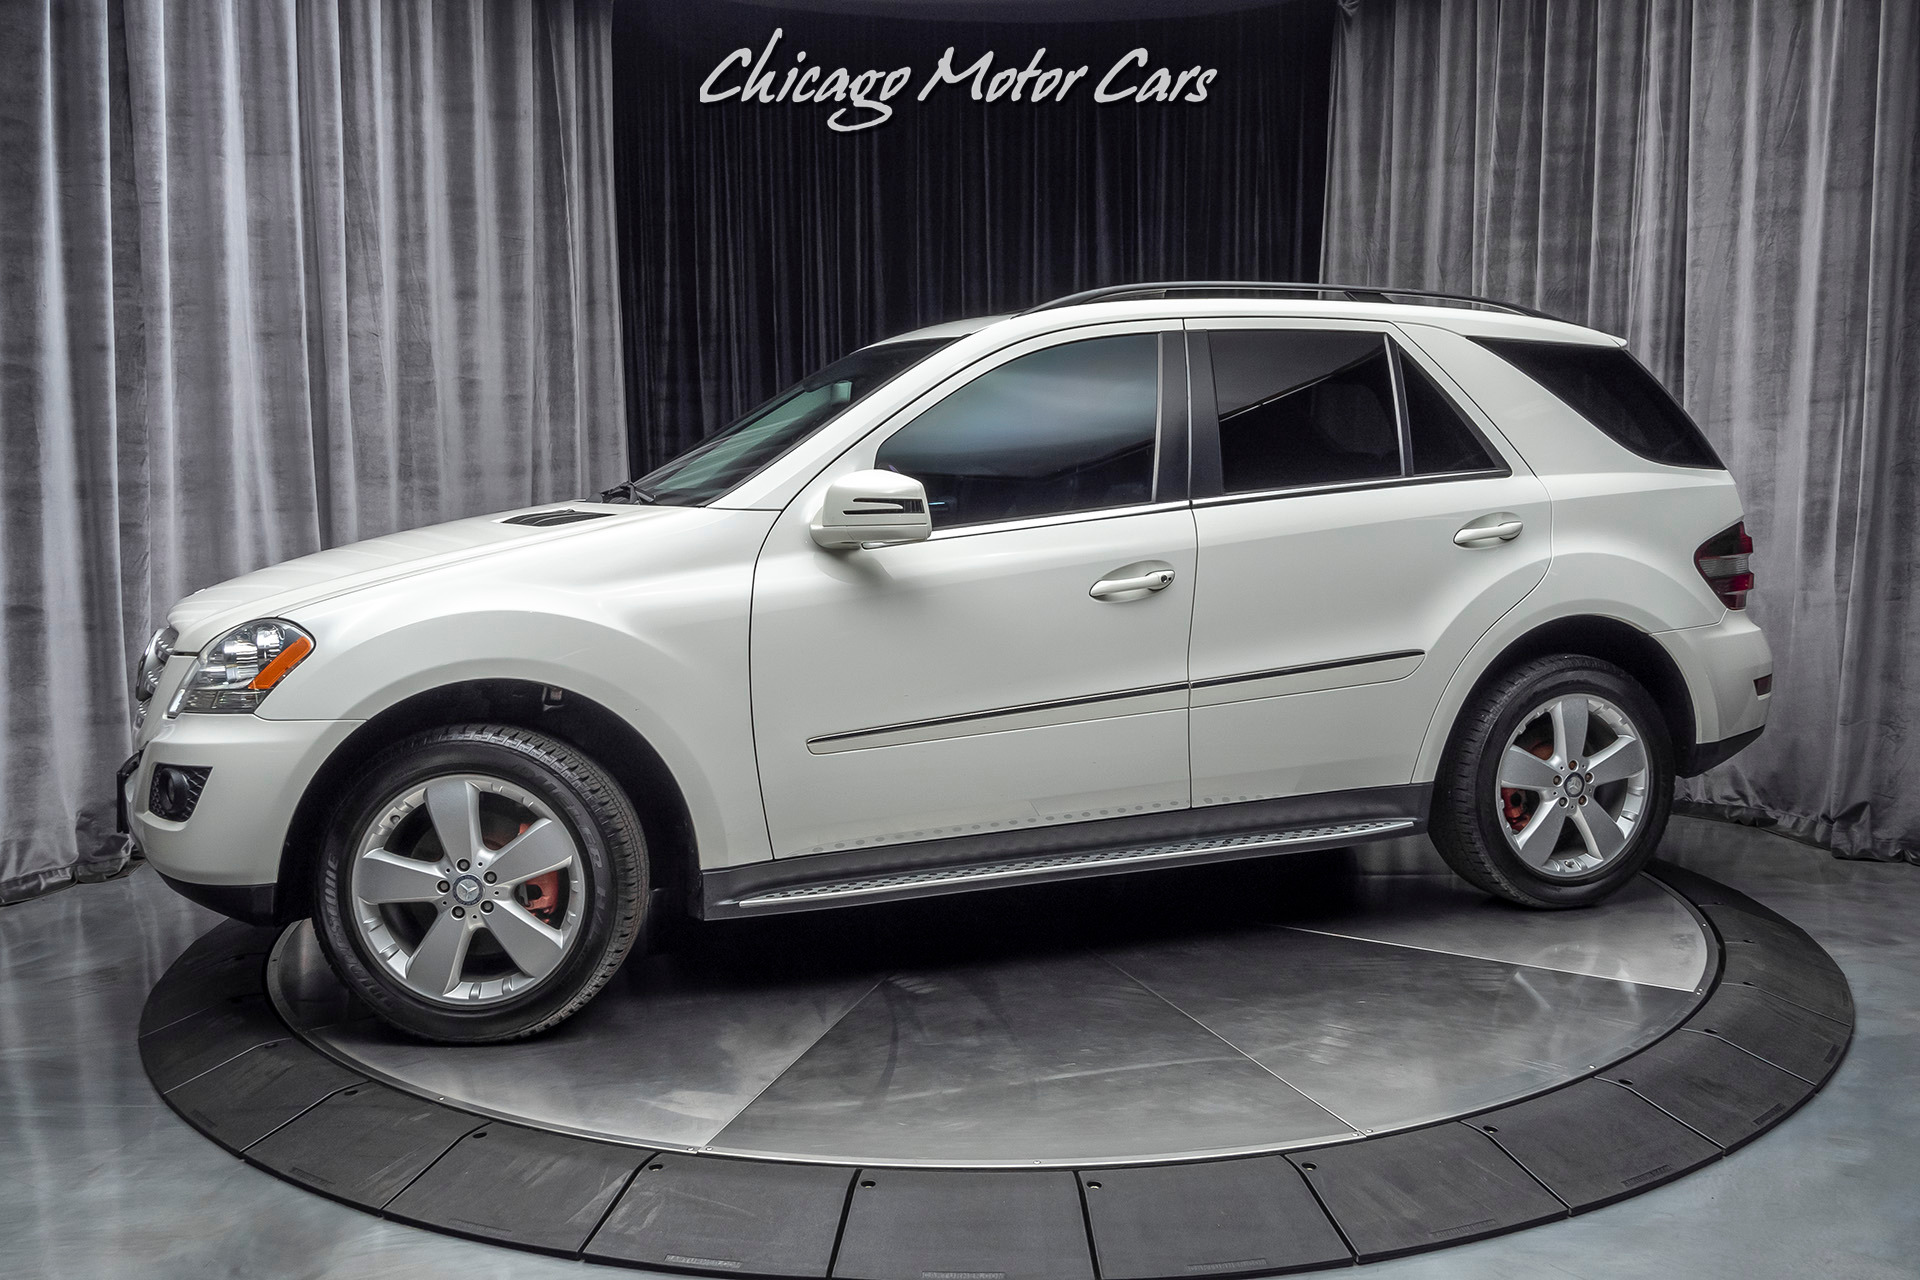 Used 2011 Mercedes Benz M Class Ml 350 4matic For Sale Special Pricing Chicago Motor Cars Stock 16816b